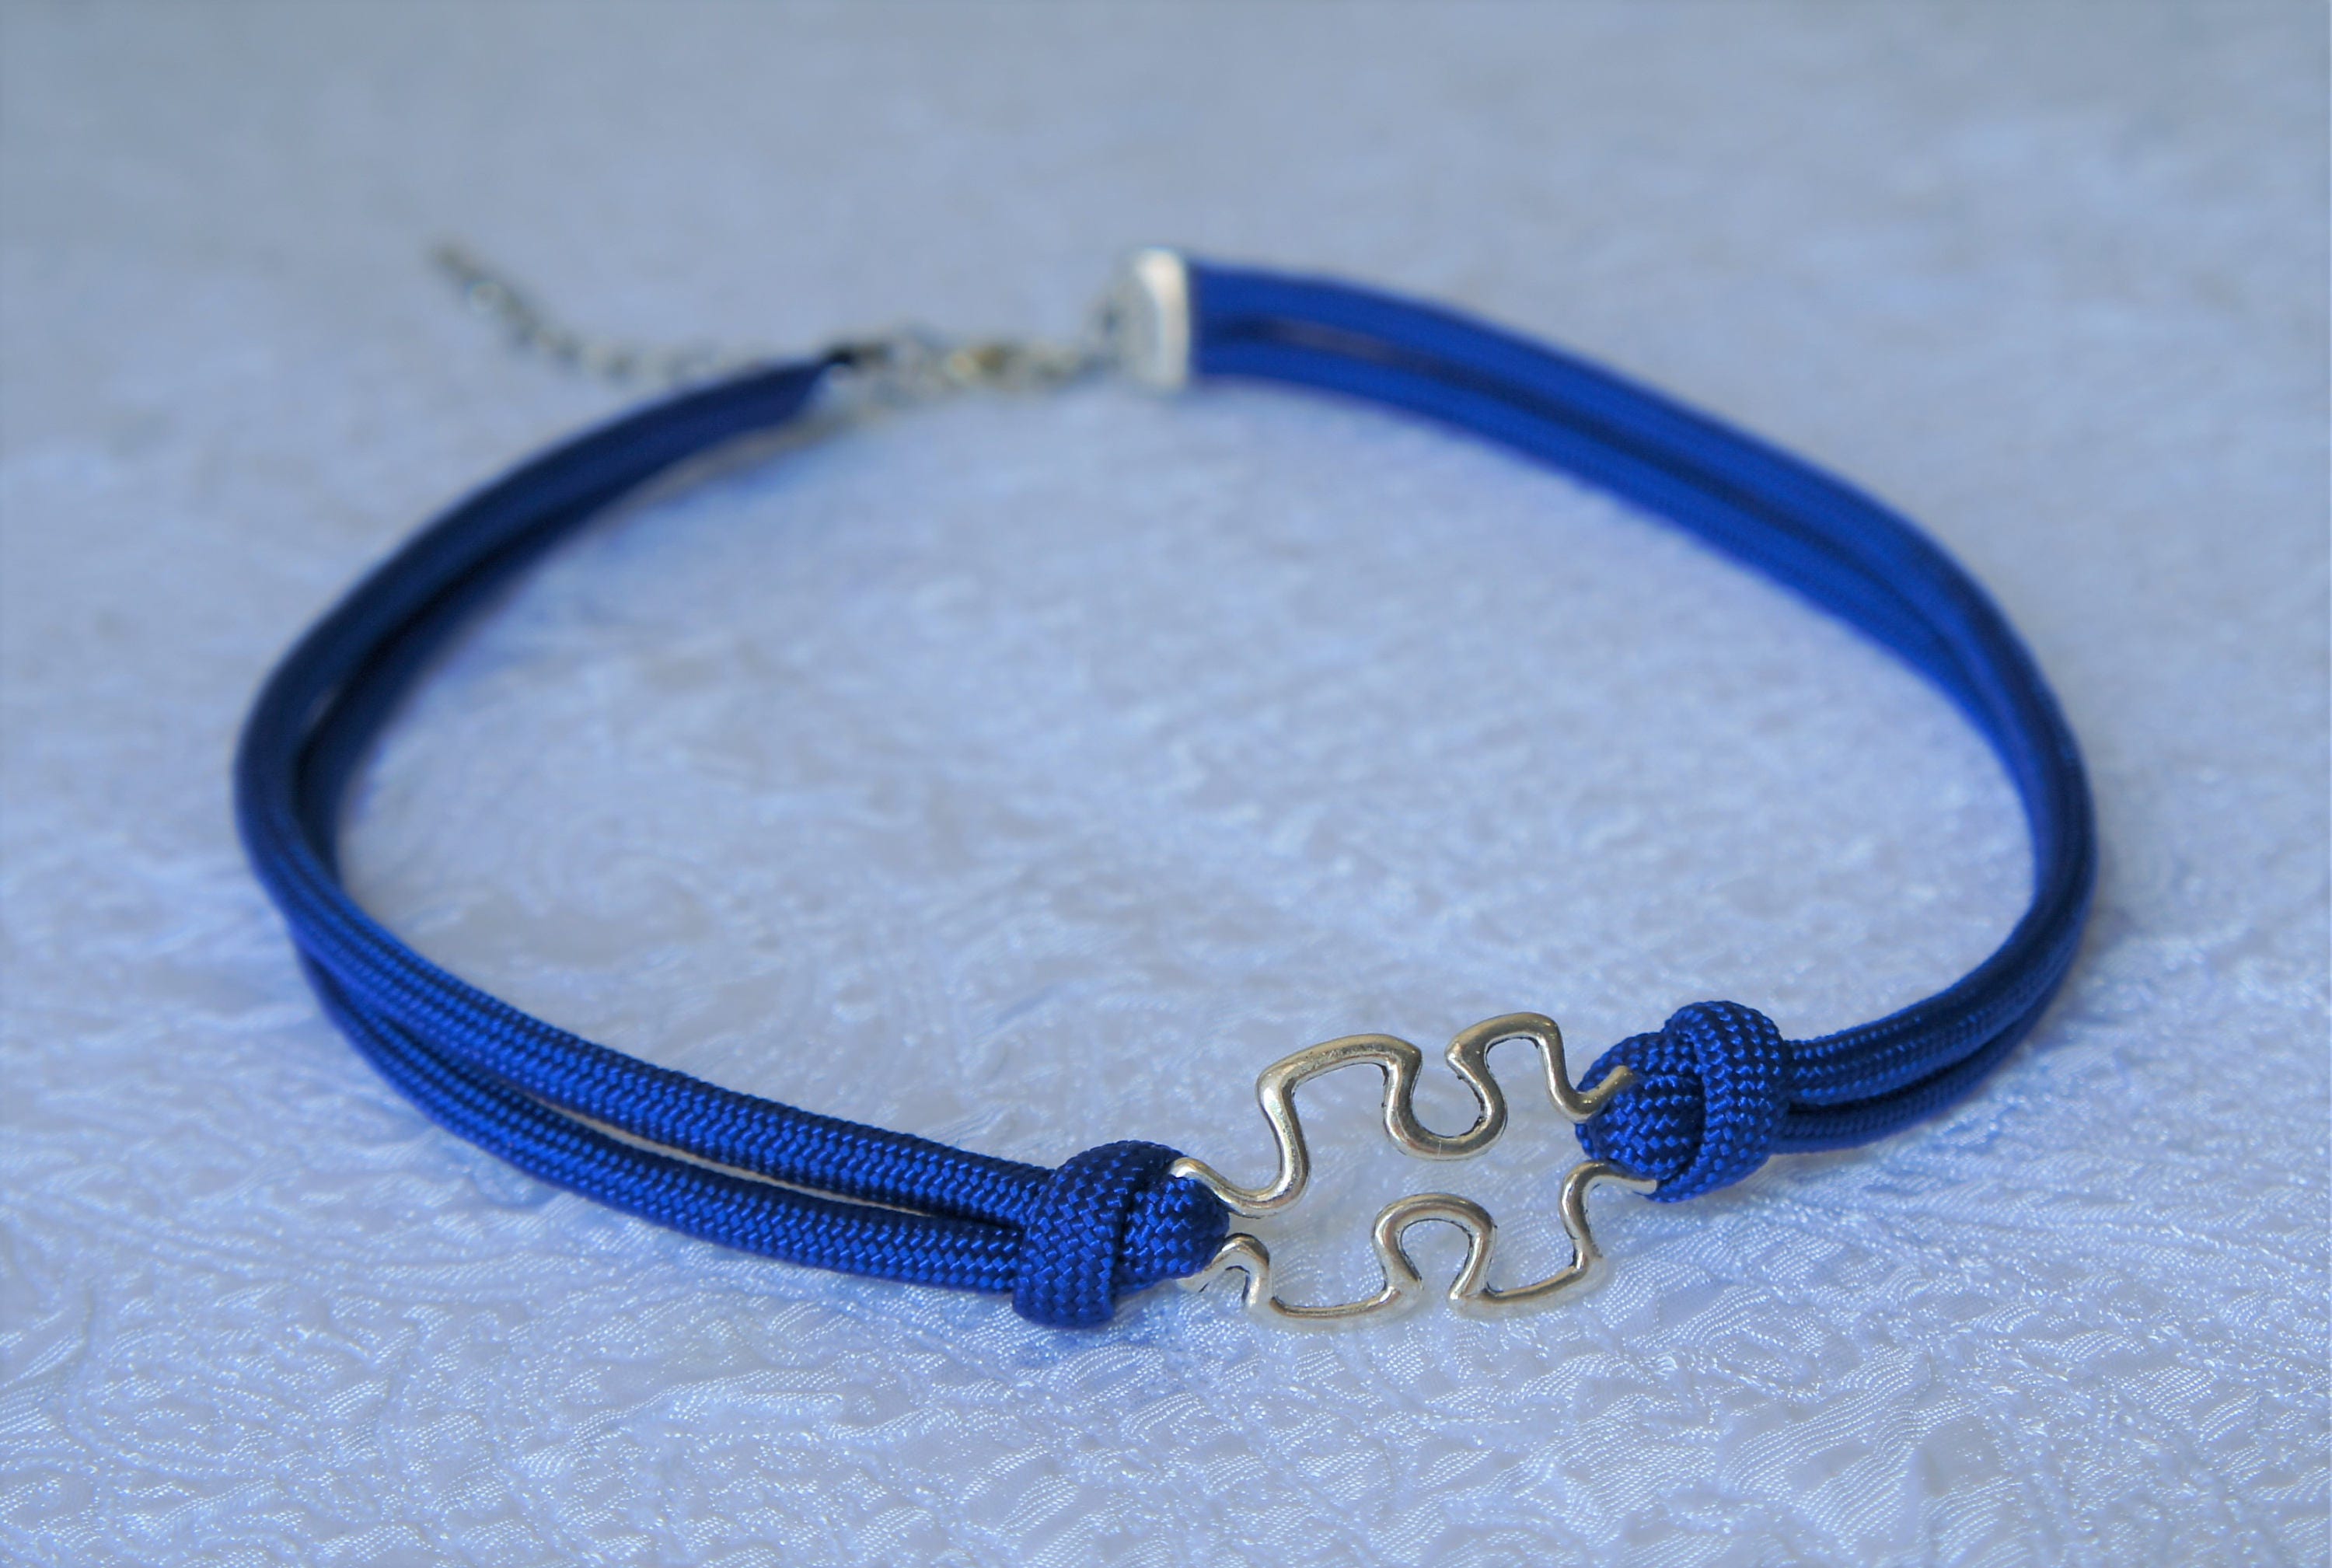 Small Autism Charmed Choker Necklace Paracord Electric Blue | Etsy